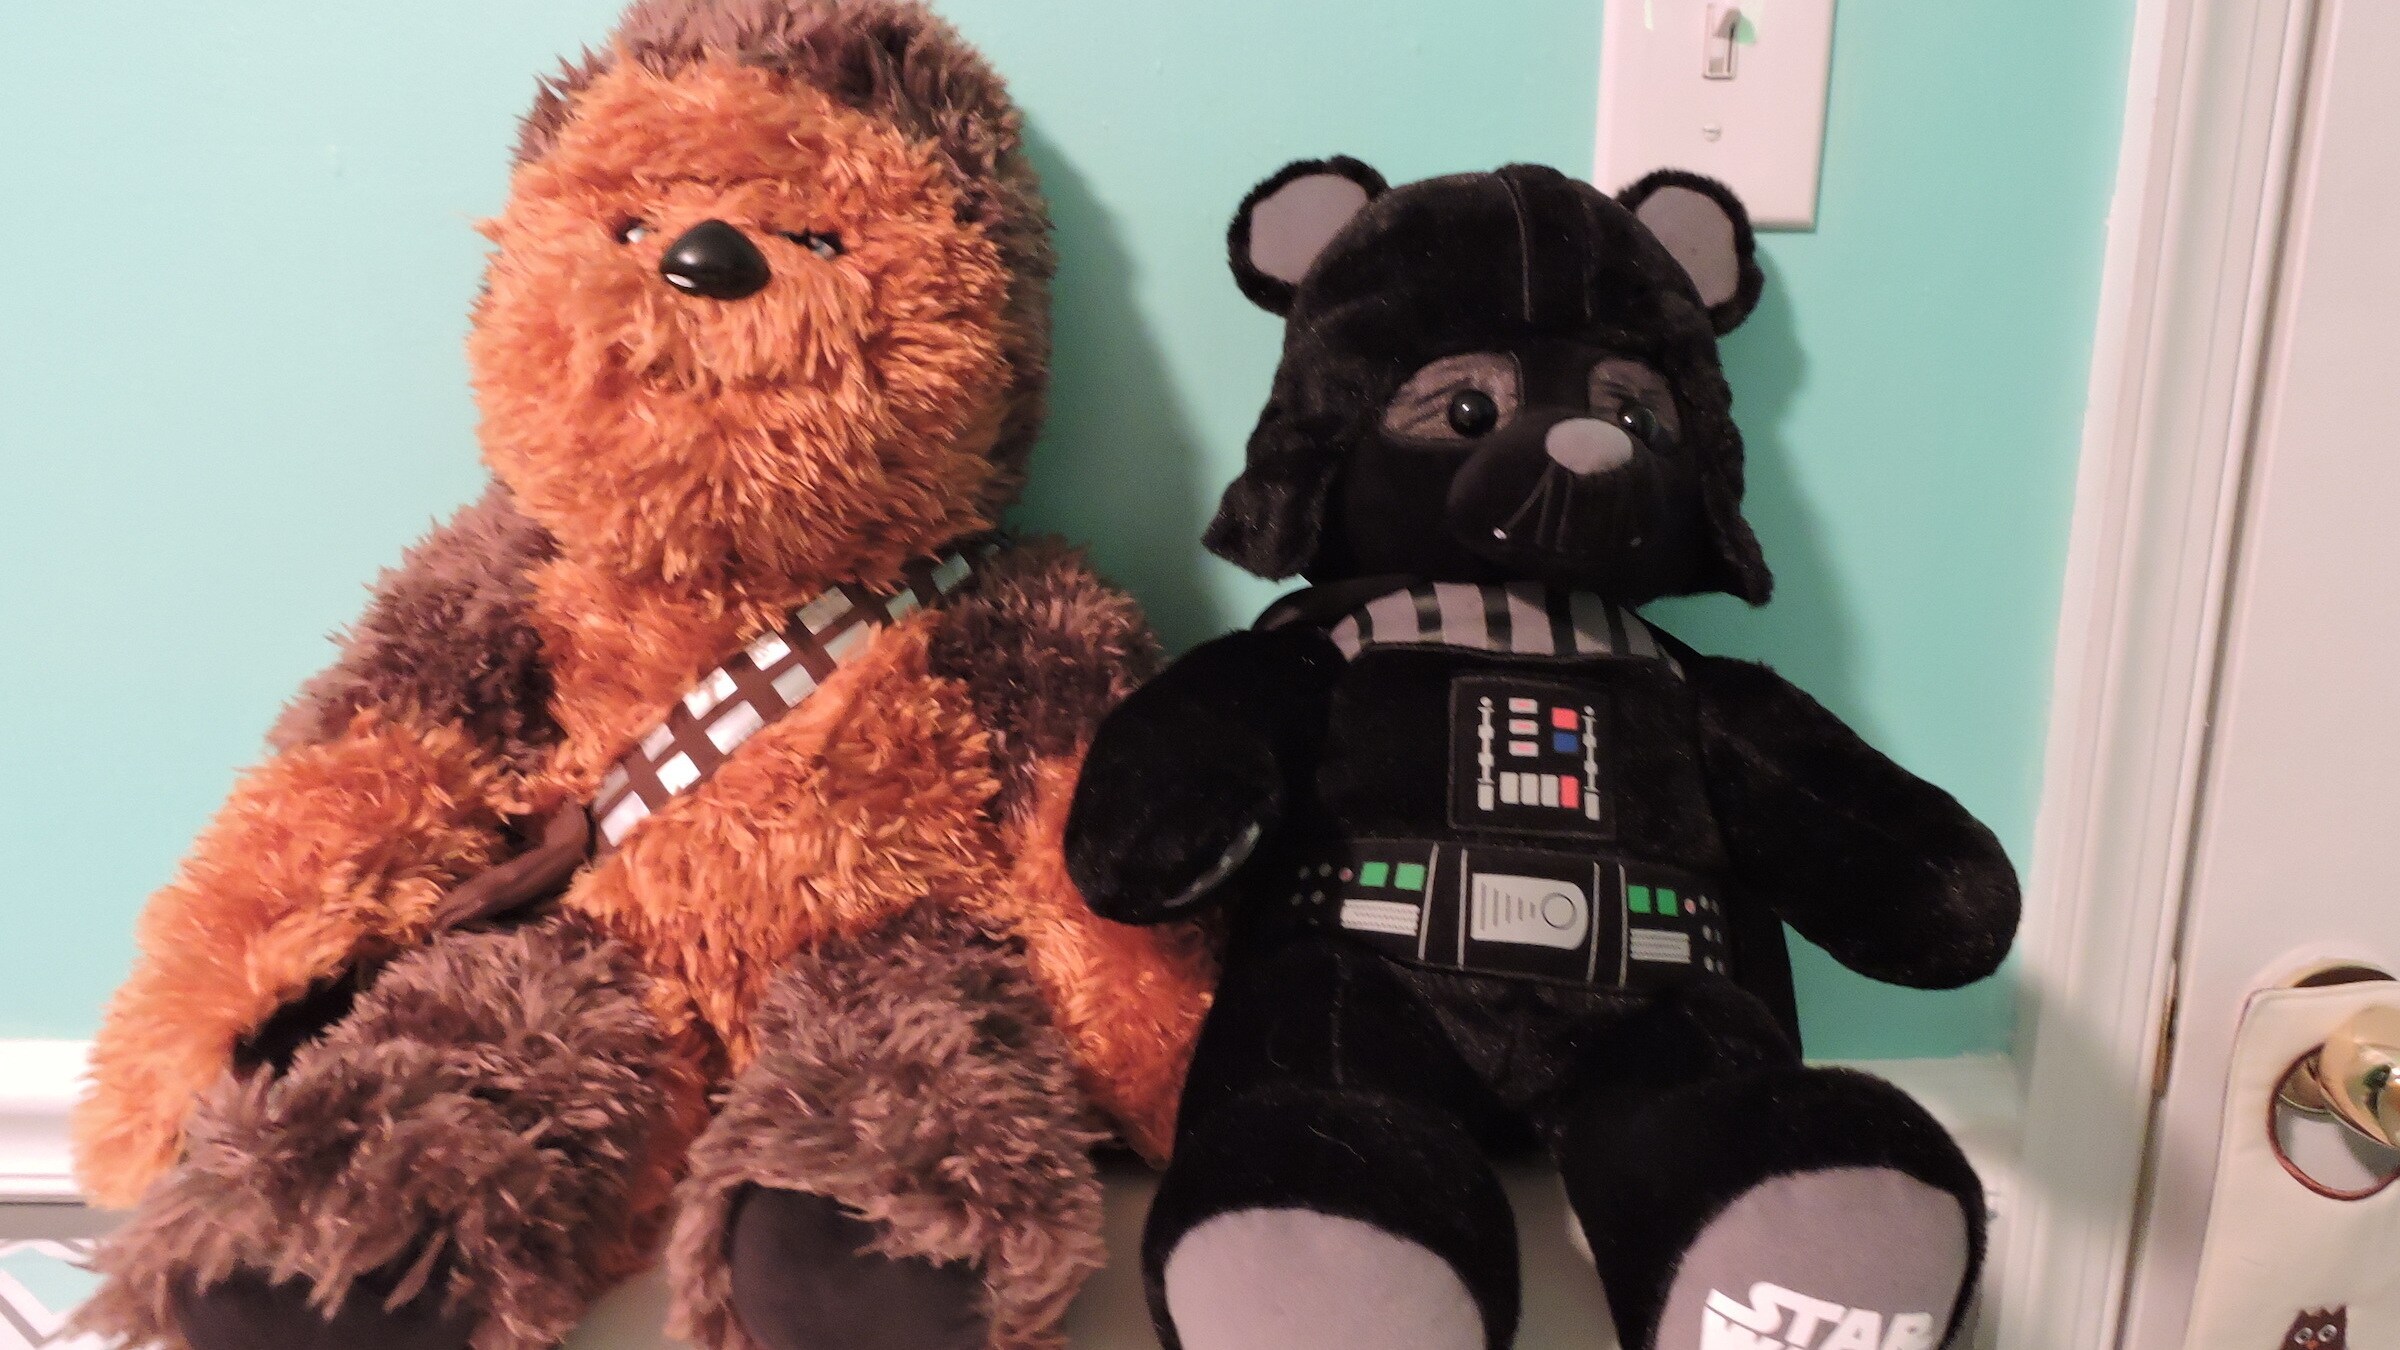 Teddy bears depicting Chewbacca and Darth Vader